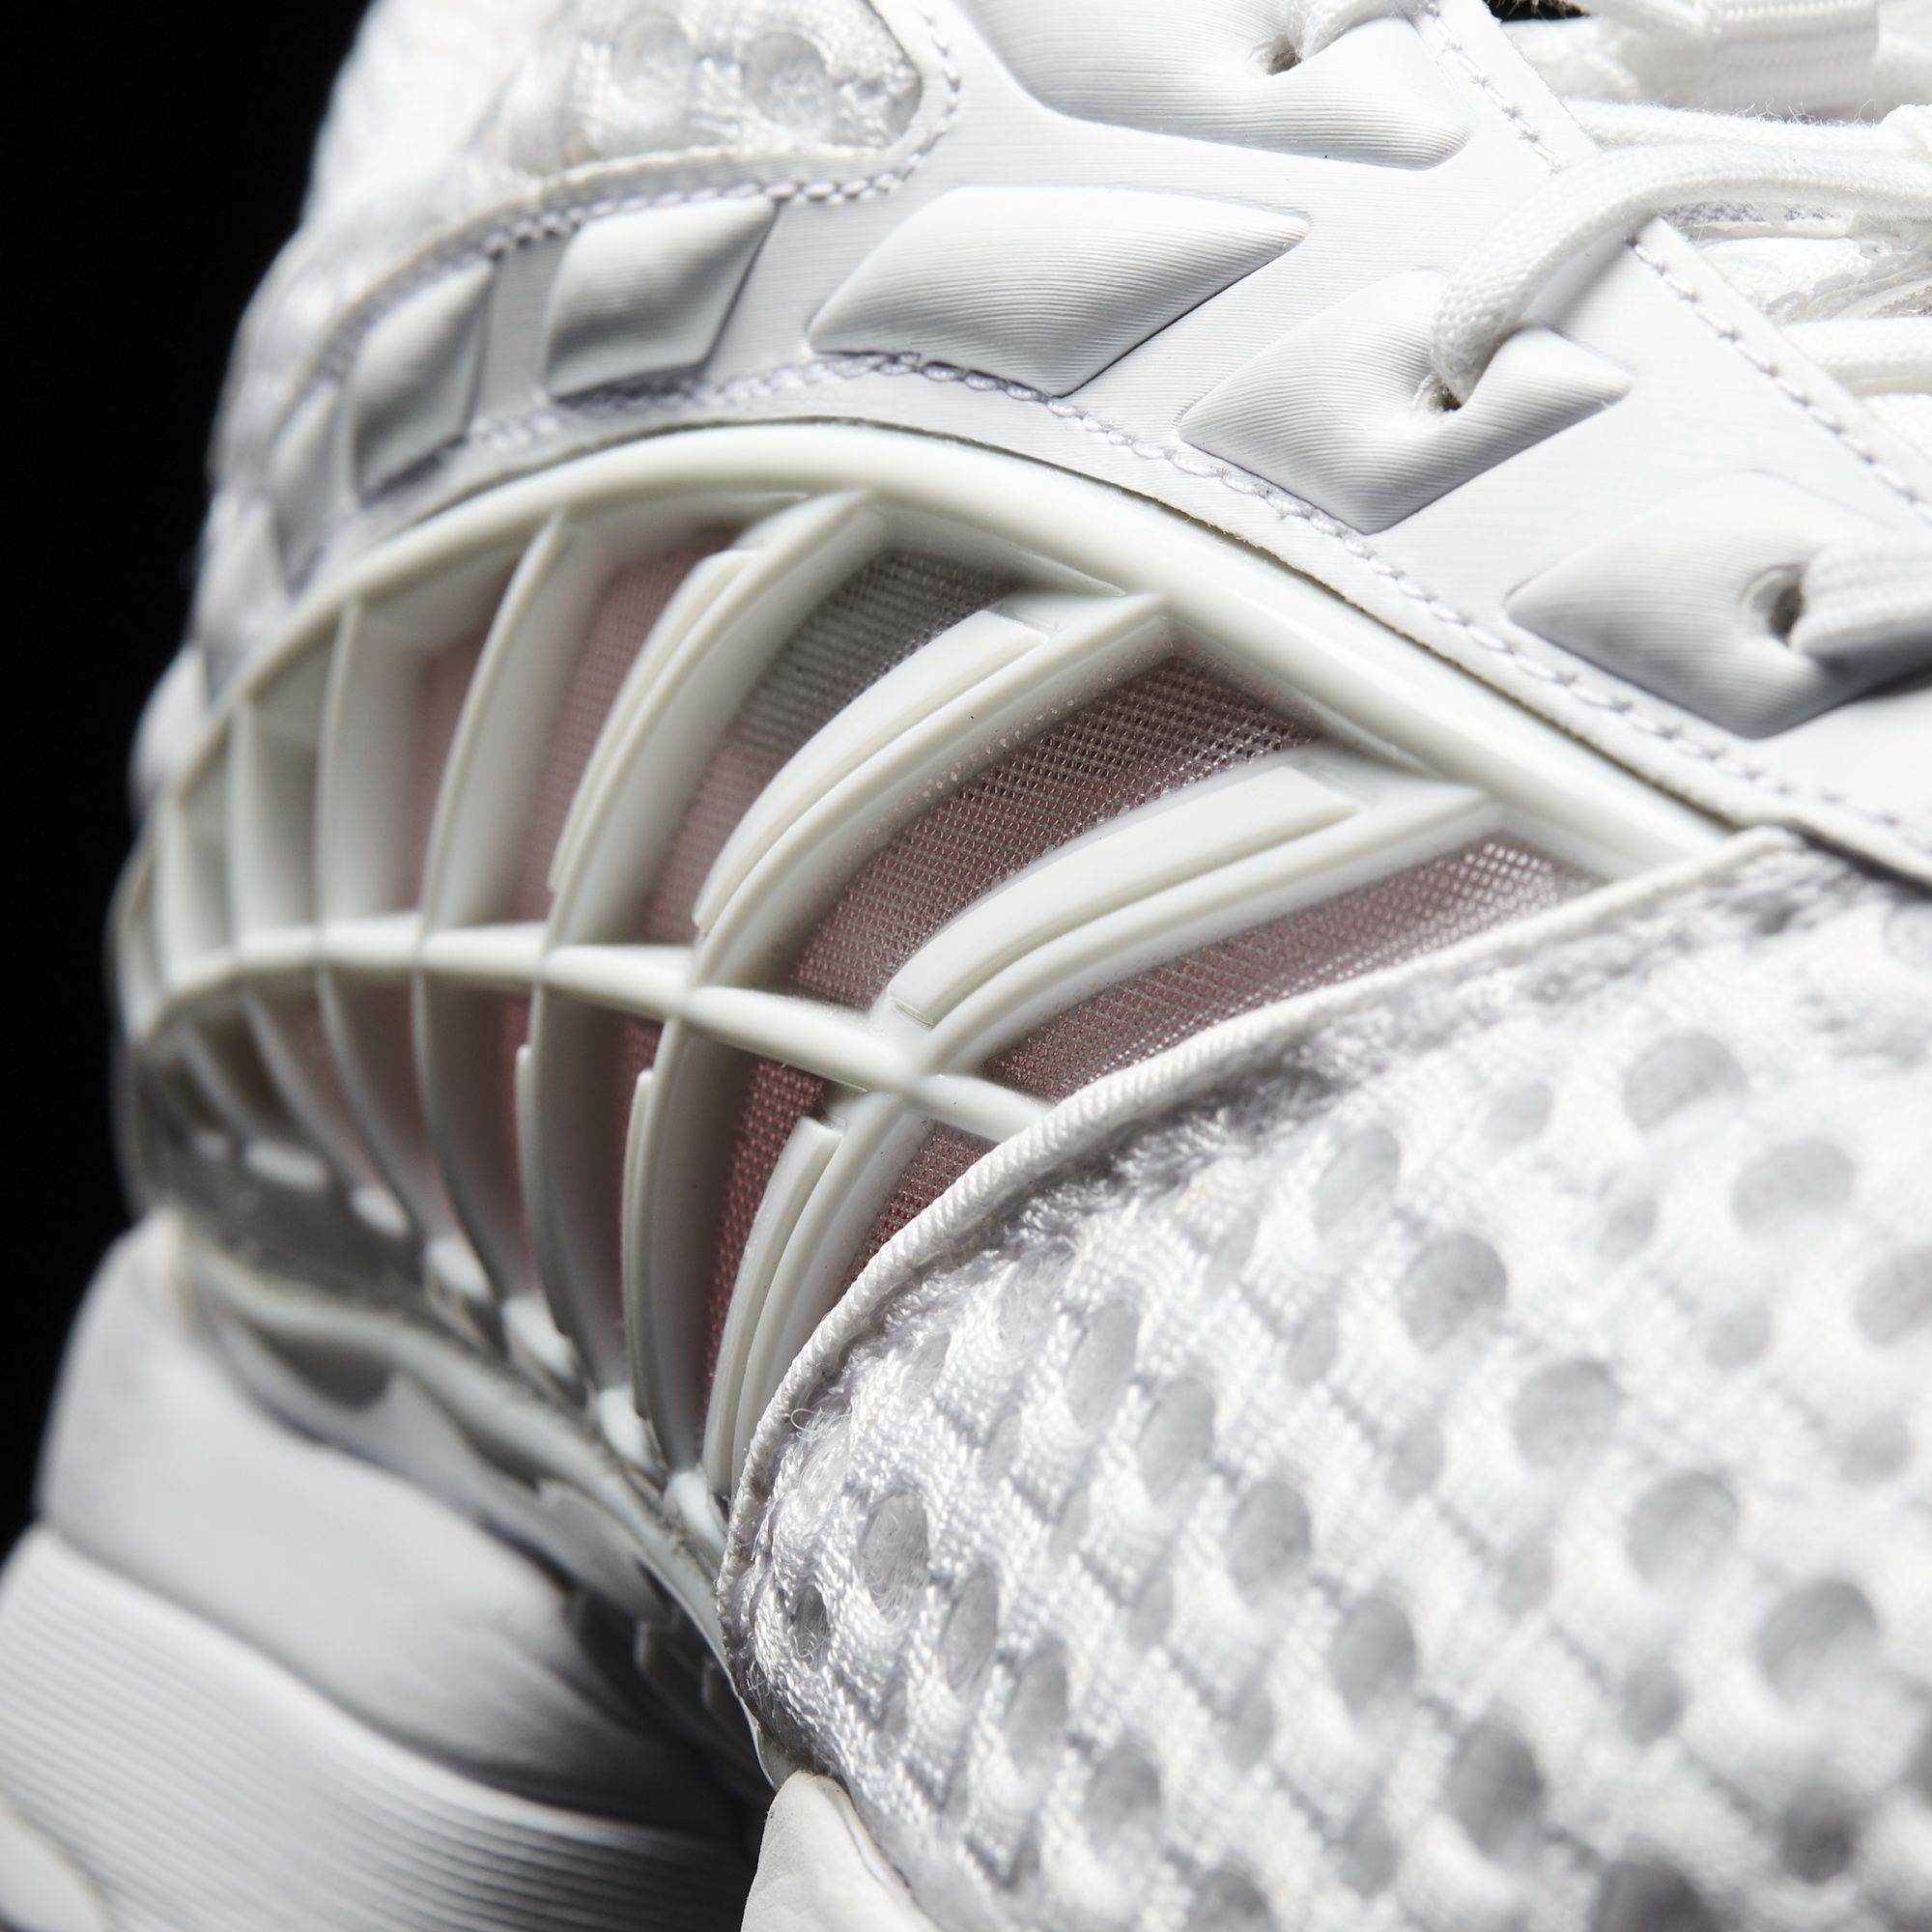 Like a Supercar, the adidas ClimaCool 2 Features Huge Vents to Channel Air  - WearTesters